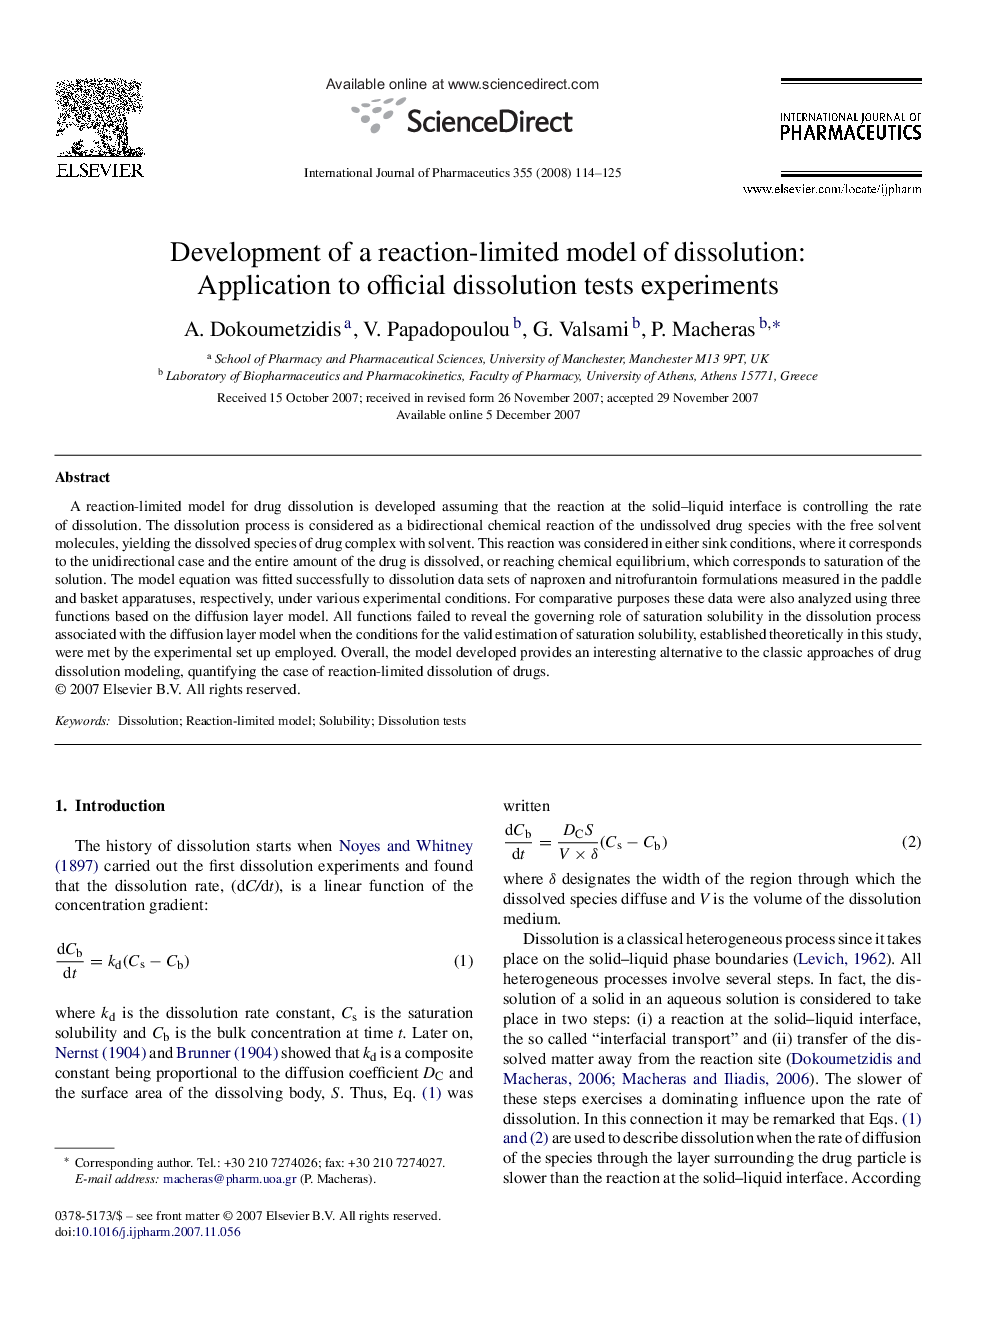 Development of a reaction-limited model of dissolution: Application to official dissolution tests experiments